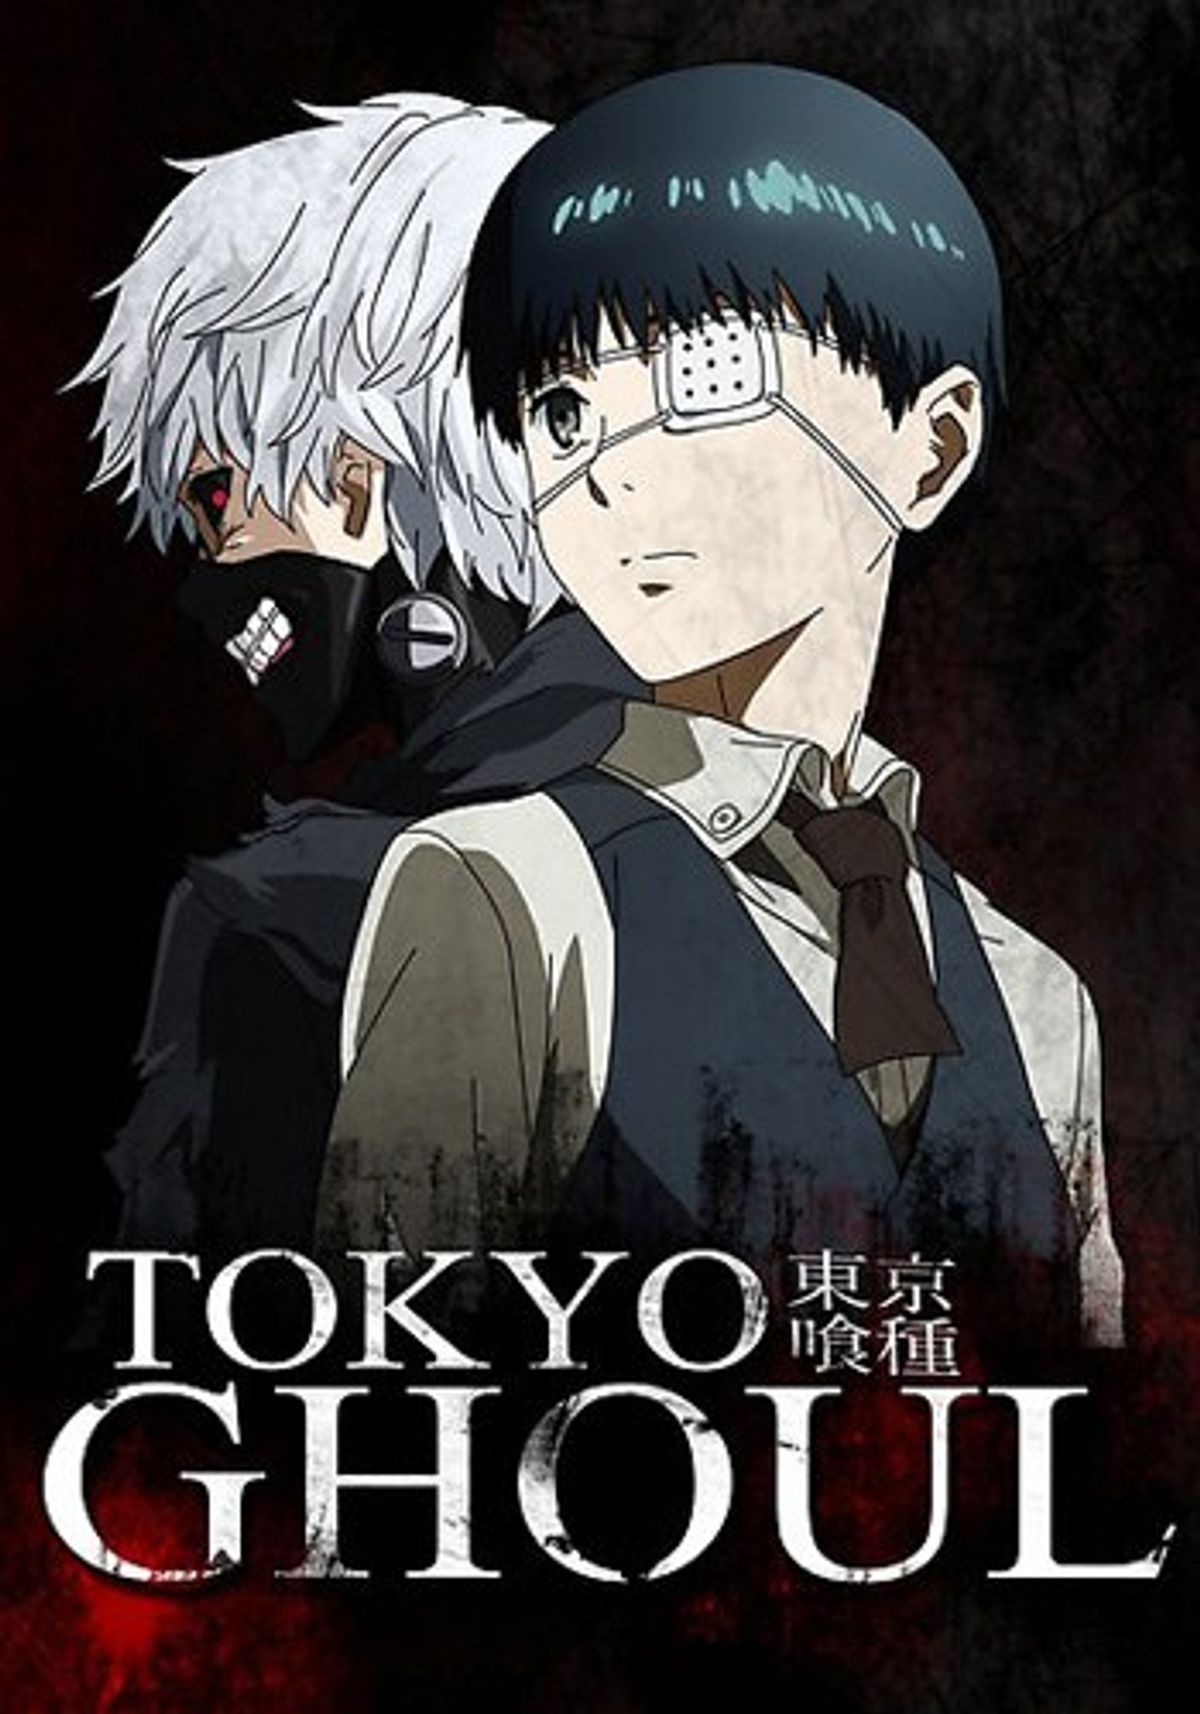 What "Tokyo Ghoul" Says About Modern Society